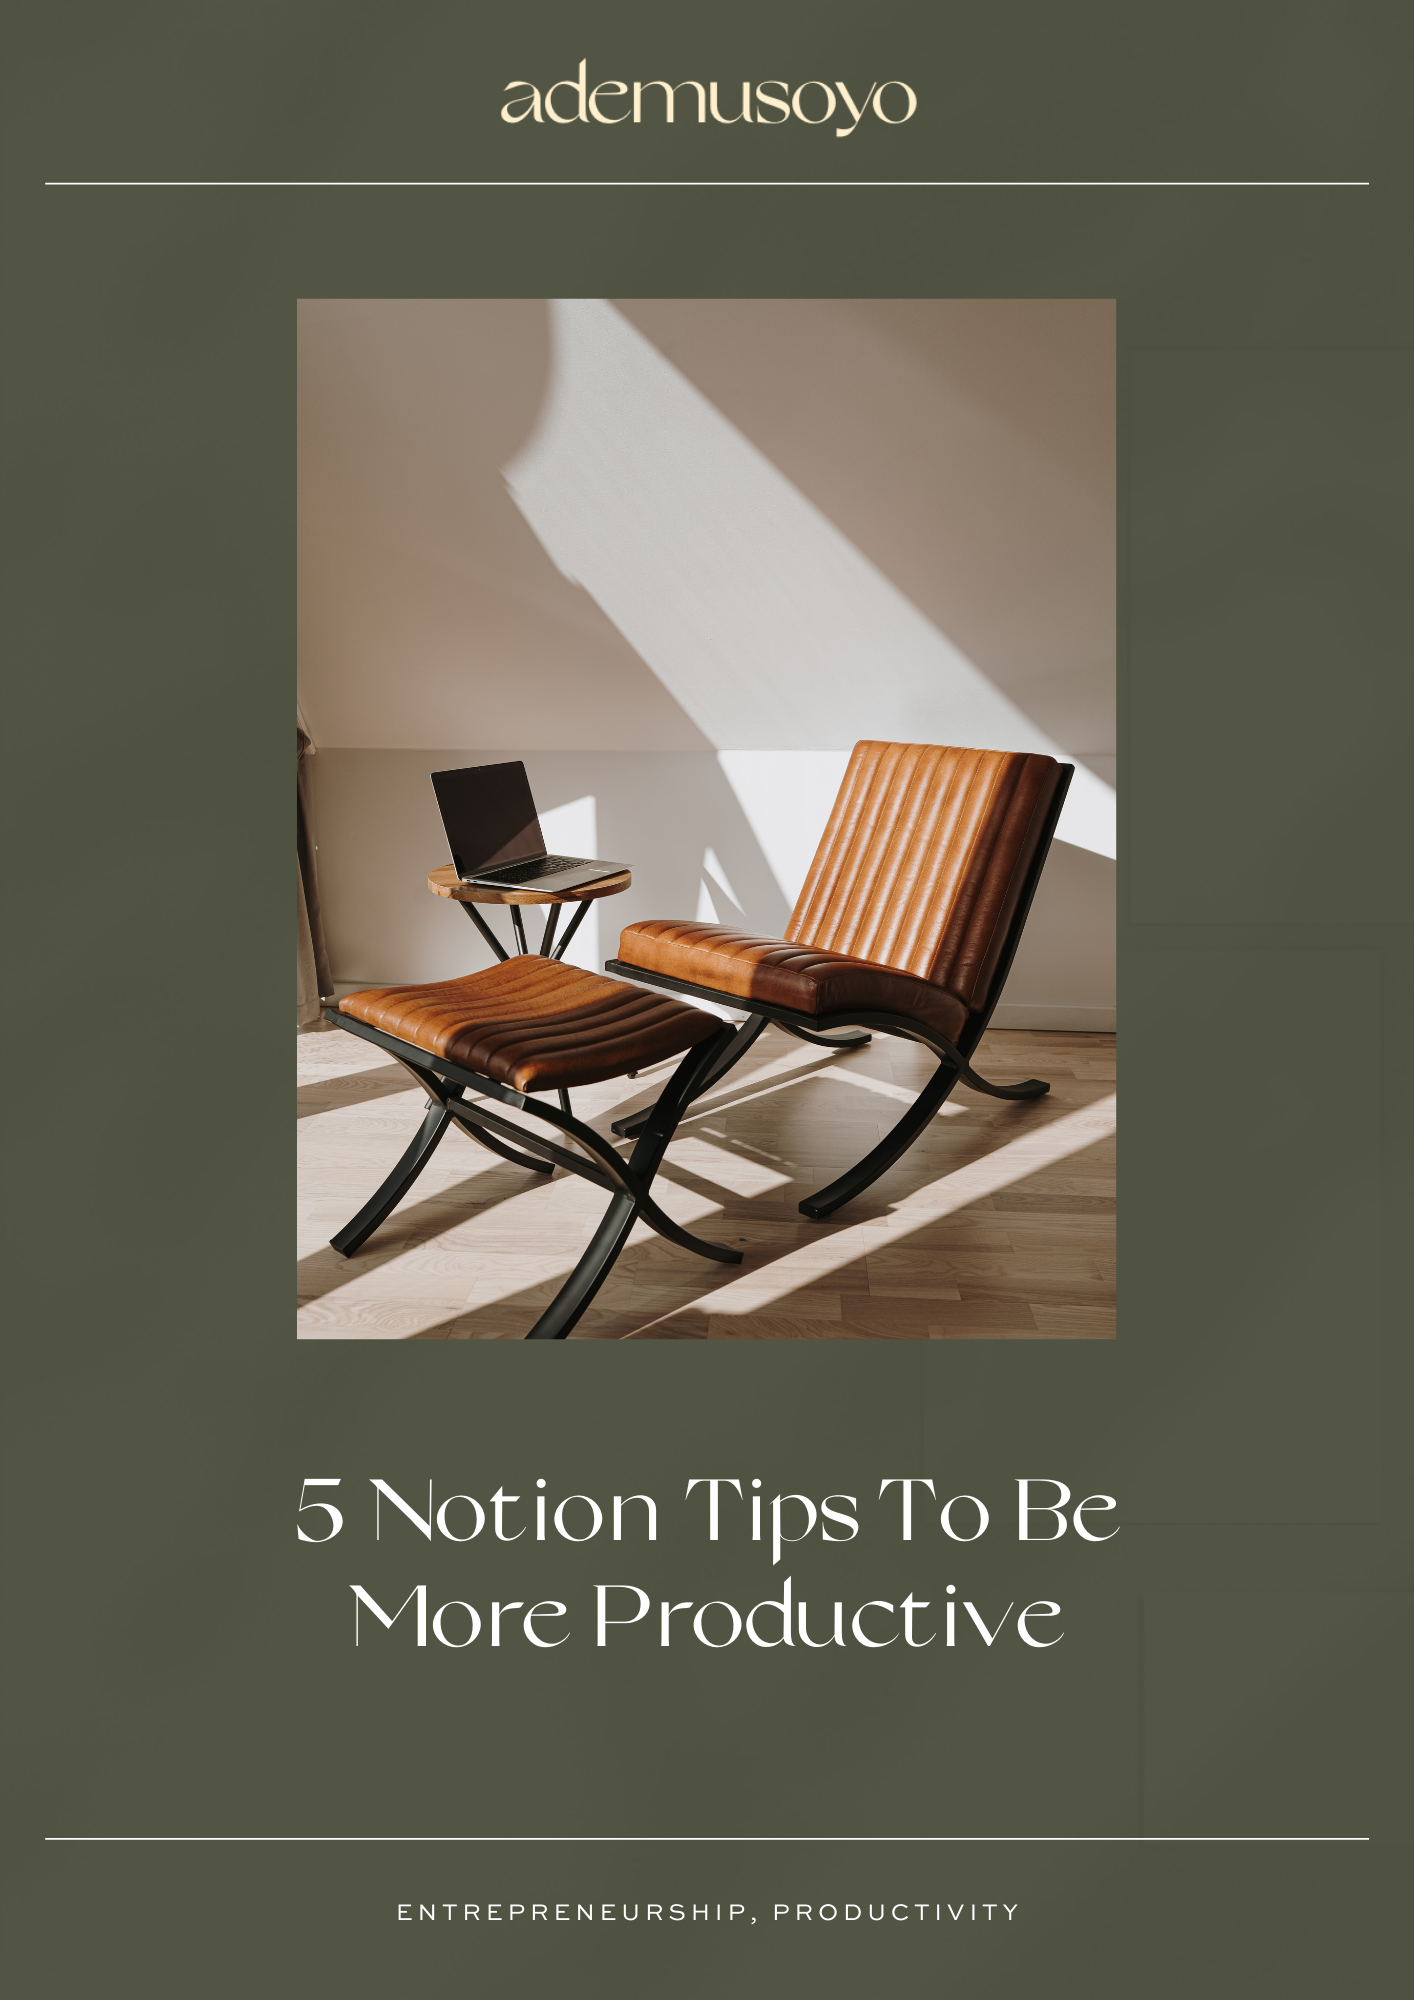 5 Notion Tips how-to-Be More Productive at work or at home, notion tips, things to be more productive, Notion template ideas, notion, dashboard, notion-system tracker